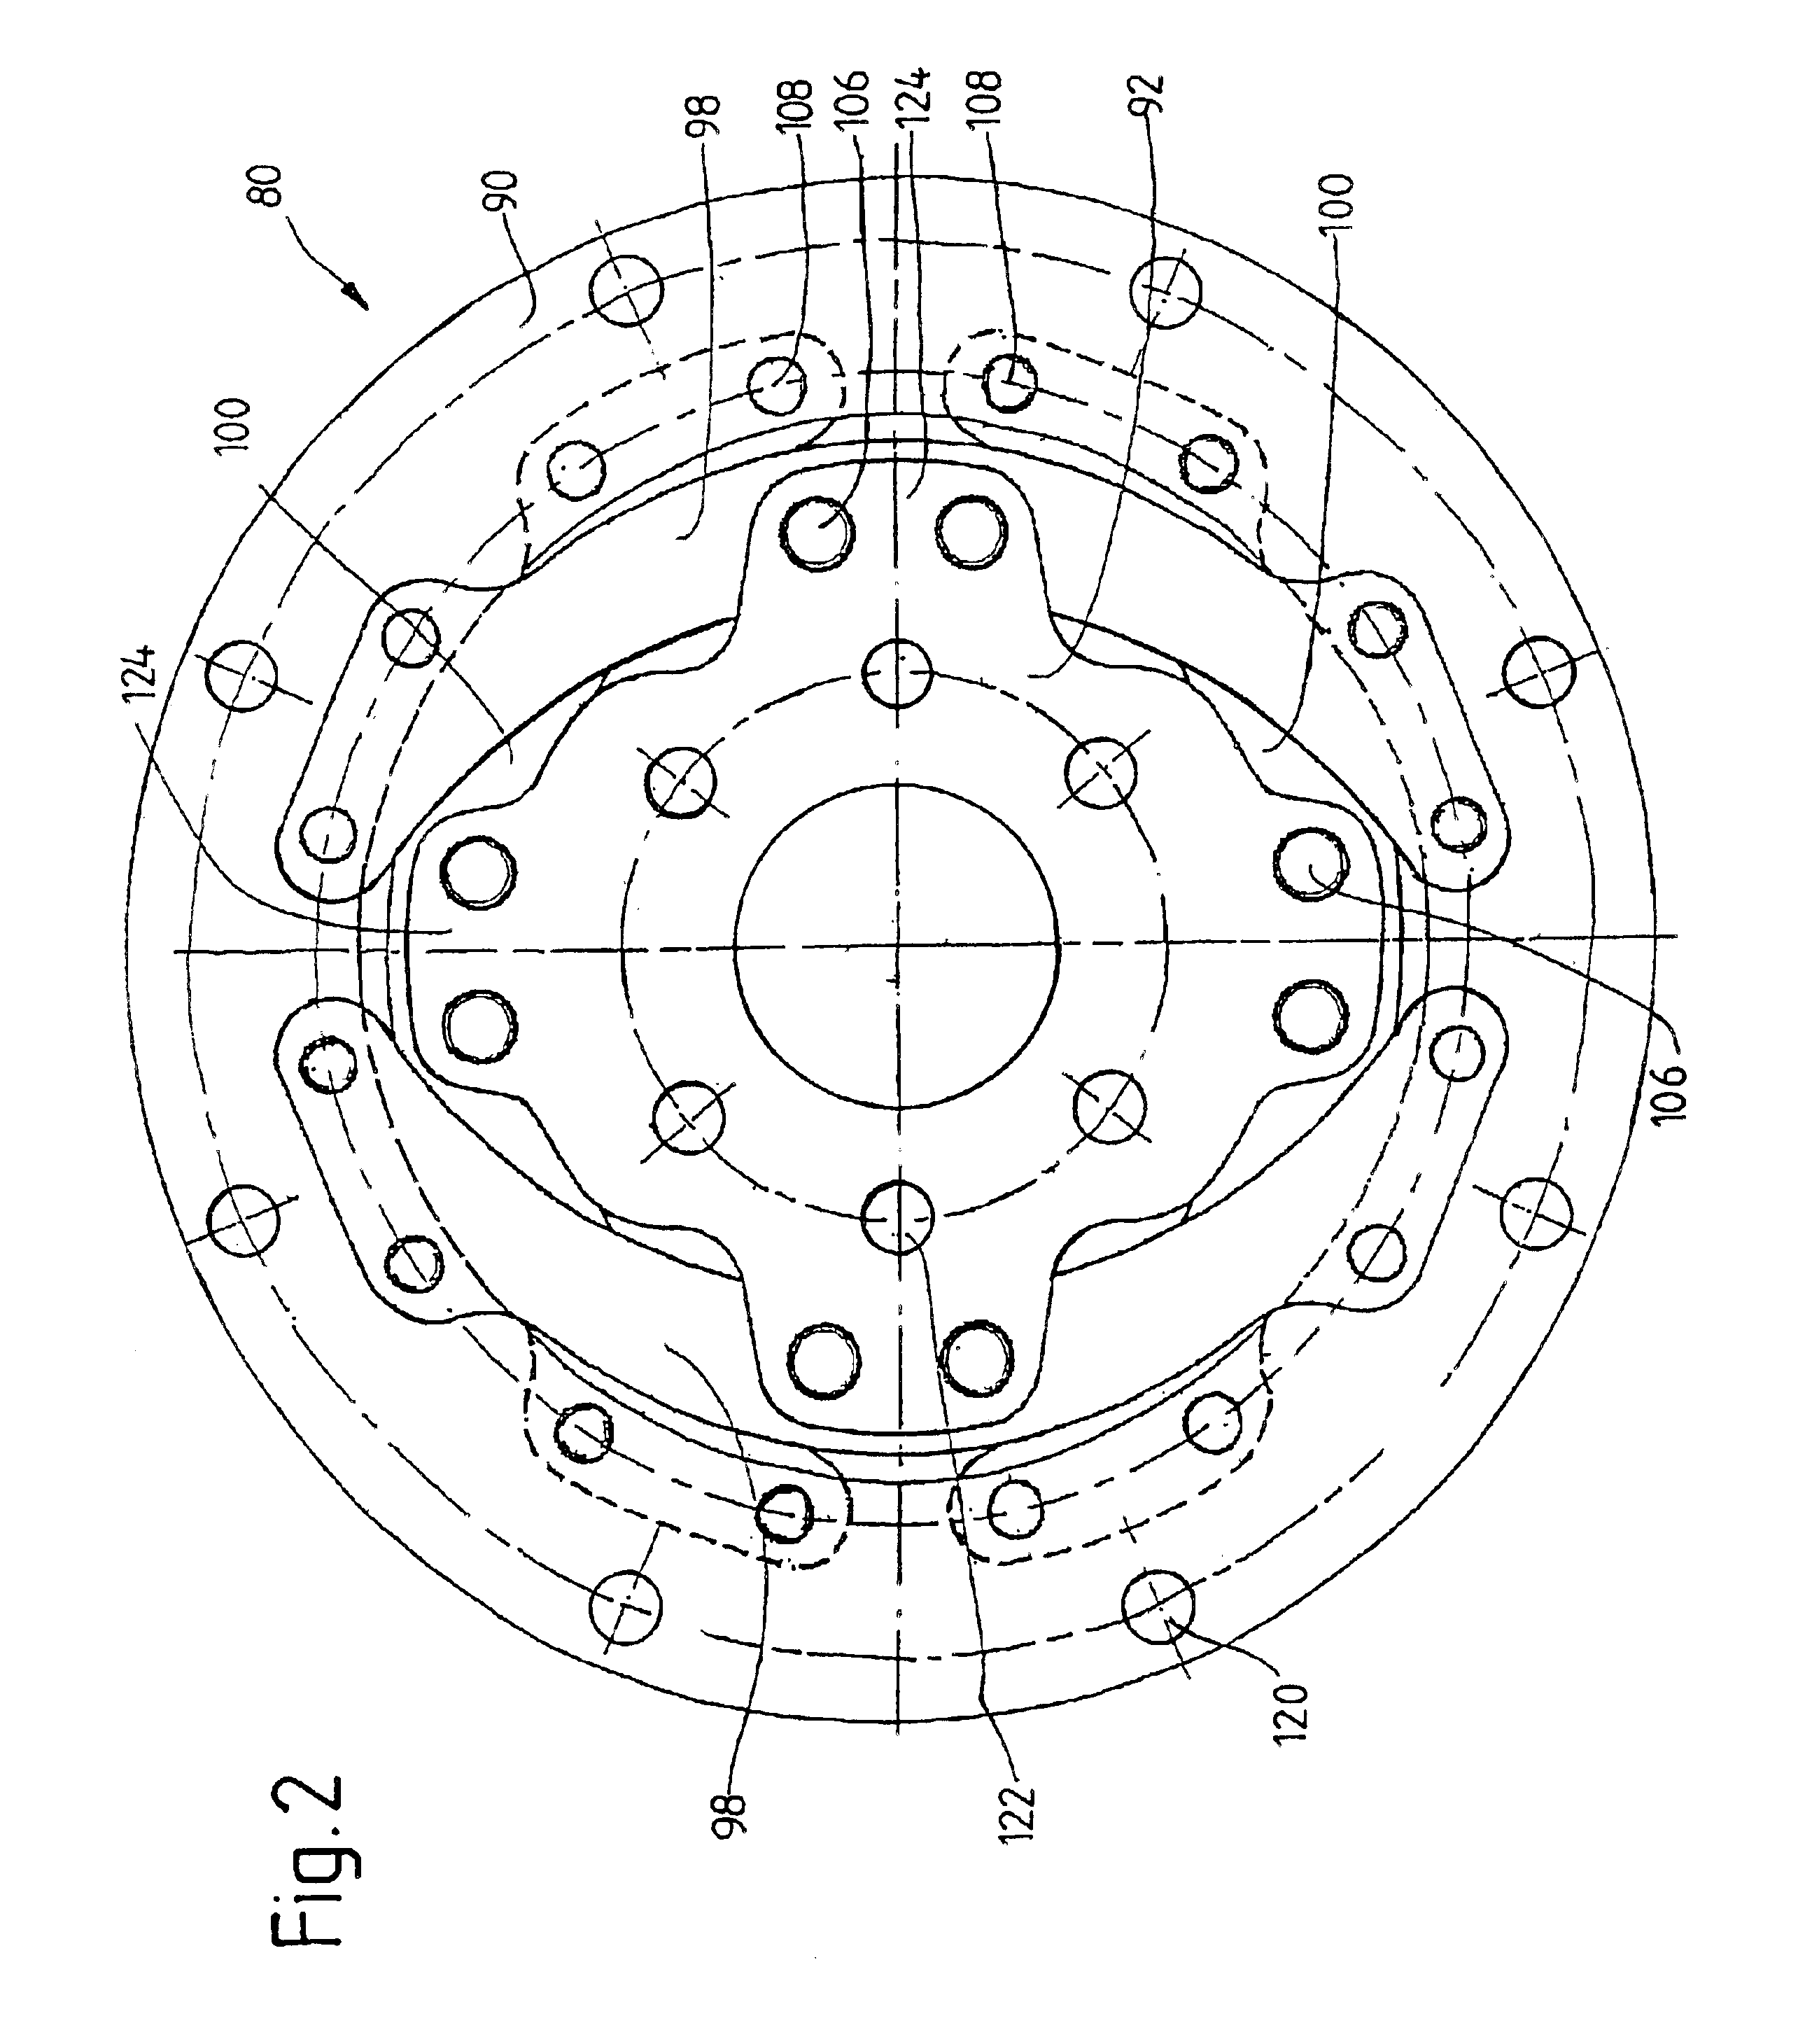 Clutch device connected centrally on the input side to a rotating shaft or rotating component in a motor vehicle drive train